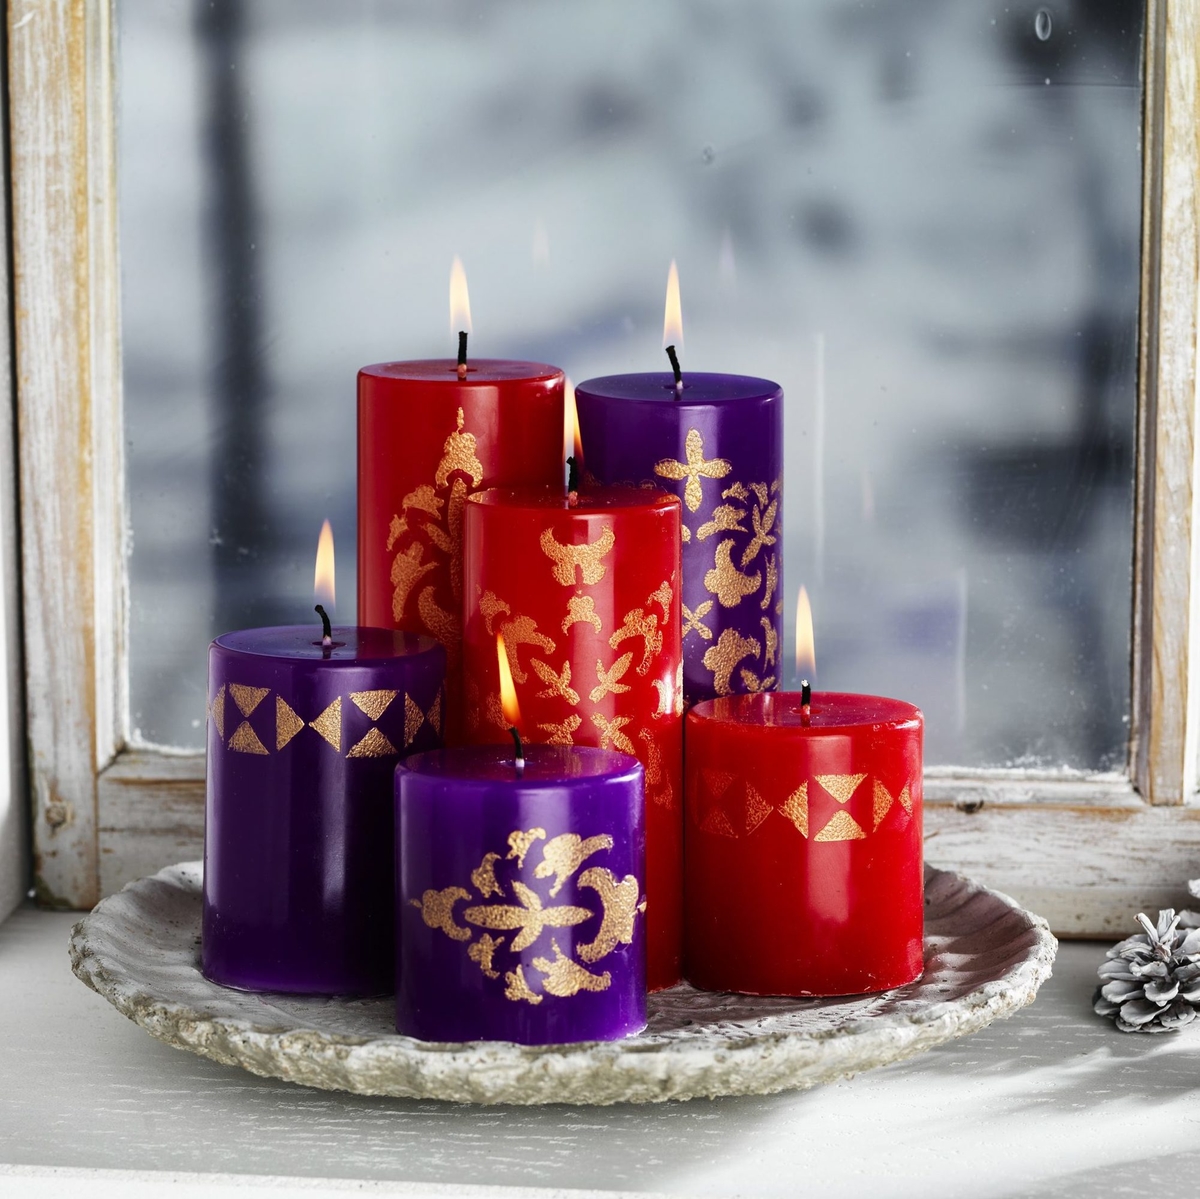 Create atmosphere with candles